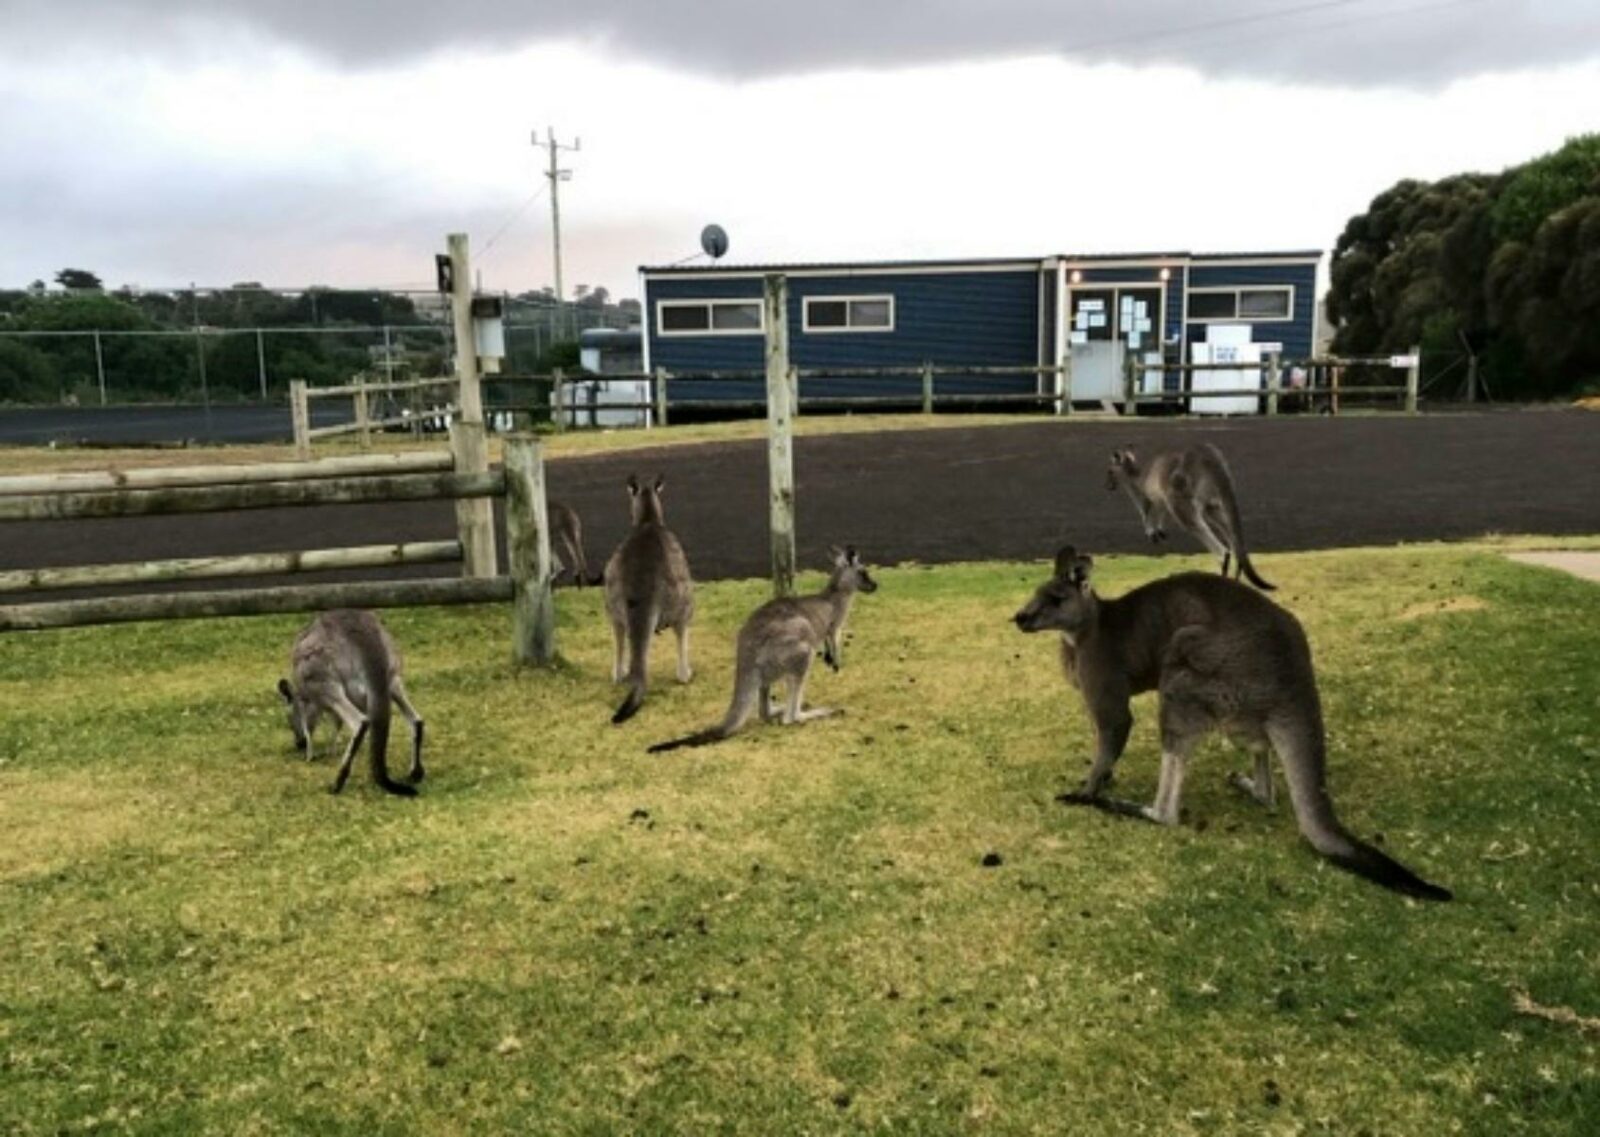 Kangaroos and reception area at the Princetown Recreation Reserve